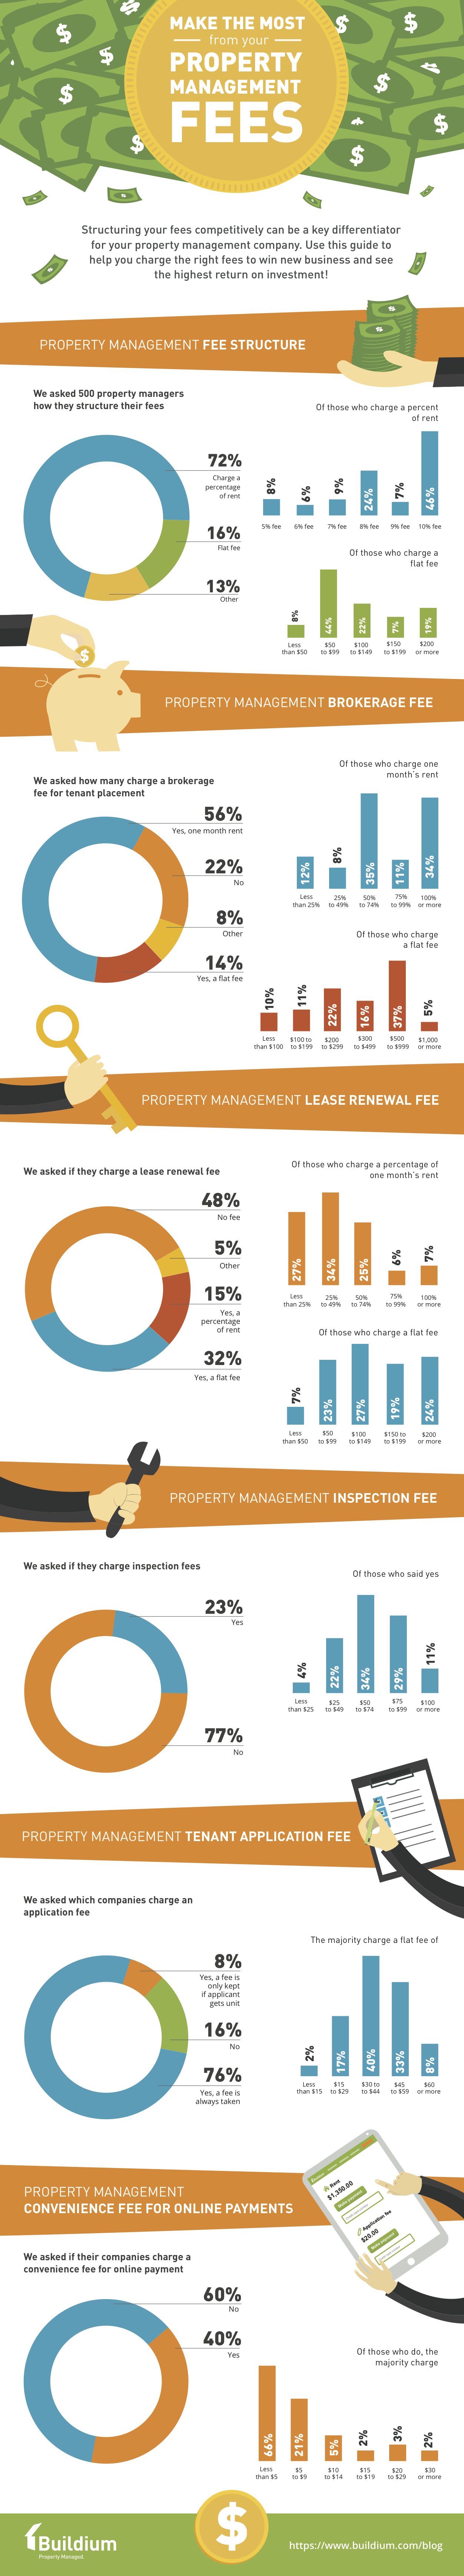 Property_Management_Fees_Infographic copy